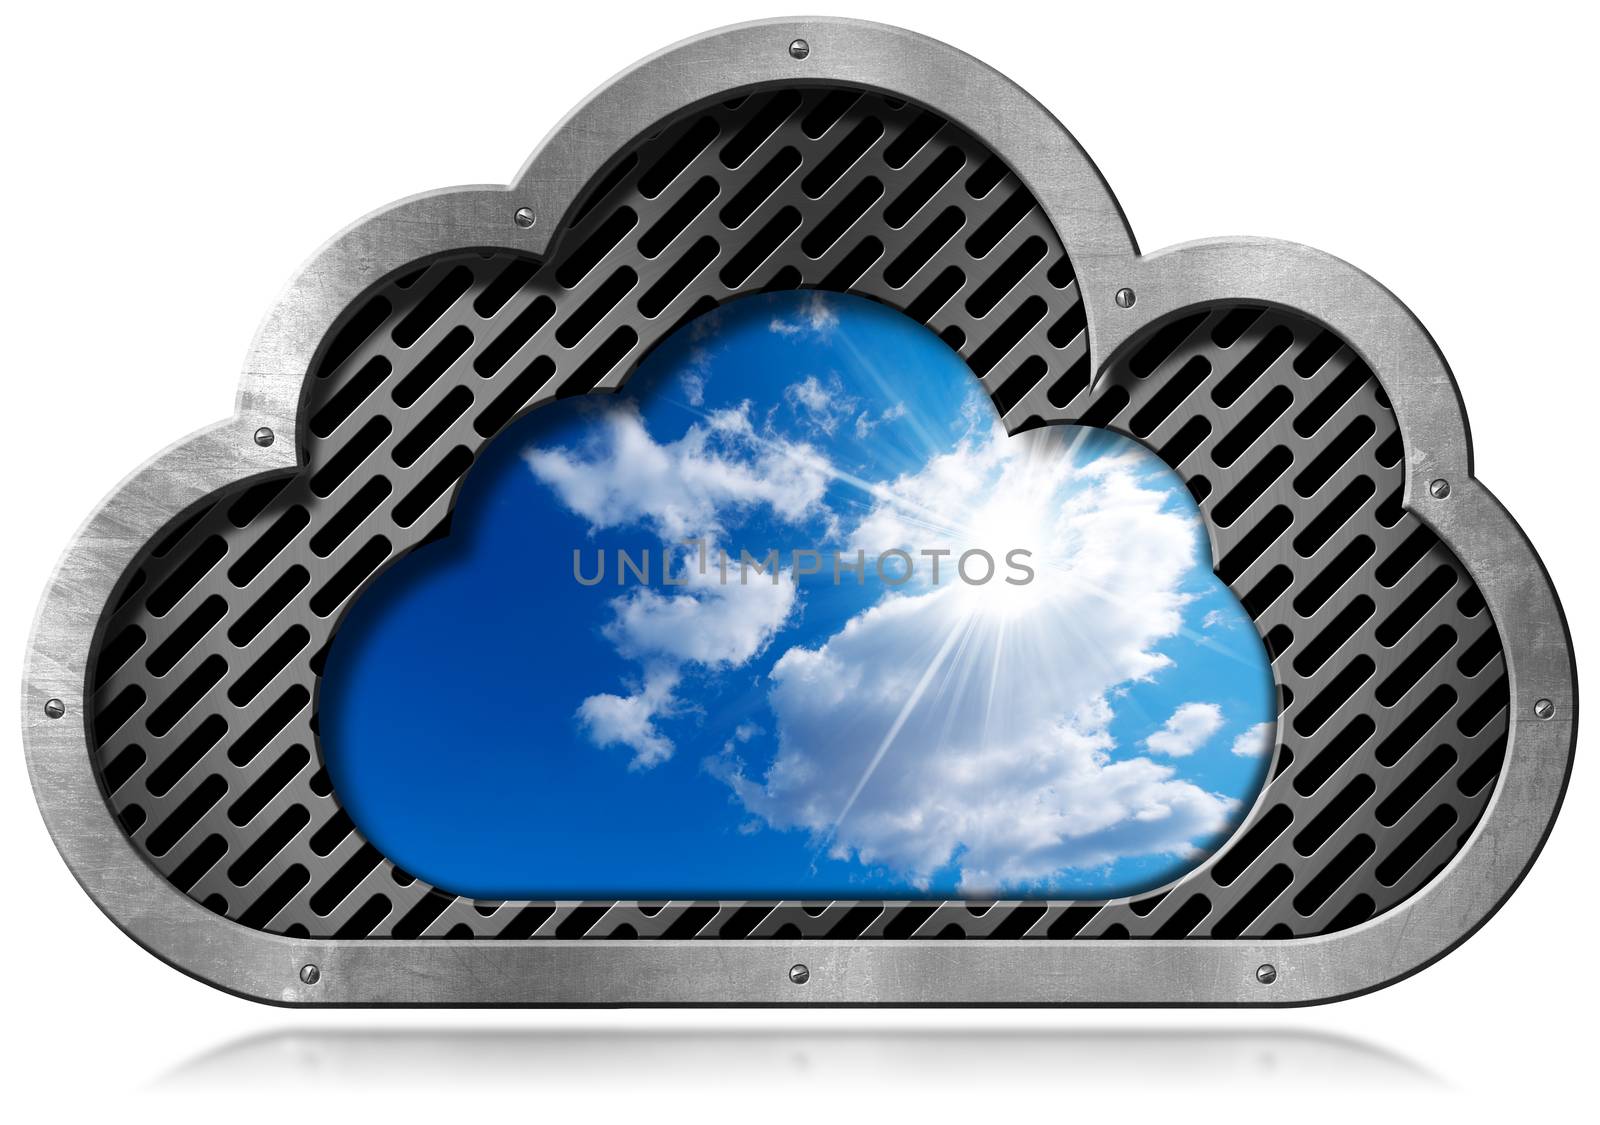 Metallic symbol in the shape of a cloud with a blue sky and clouds. Concept of cloud computing